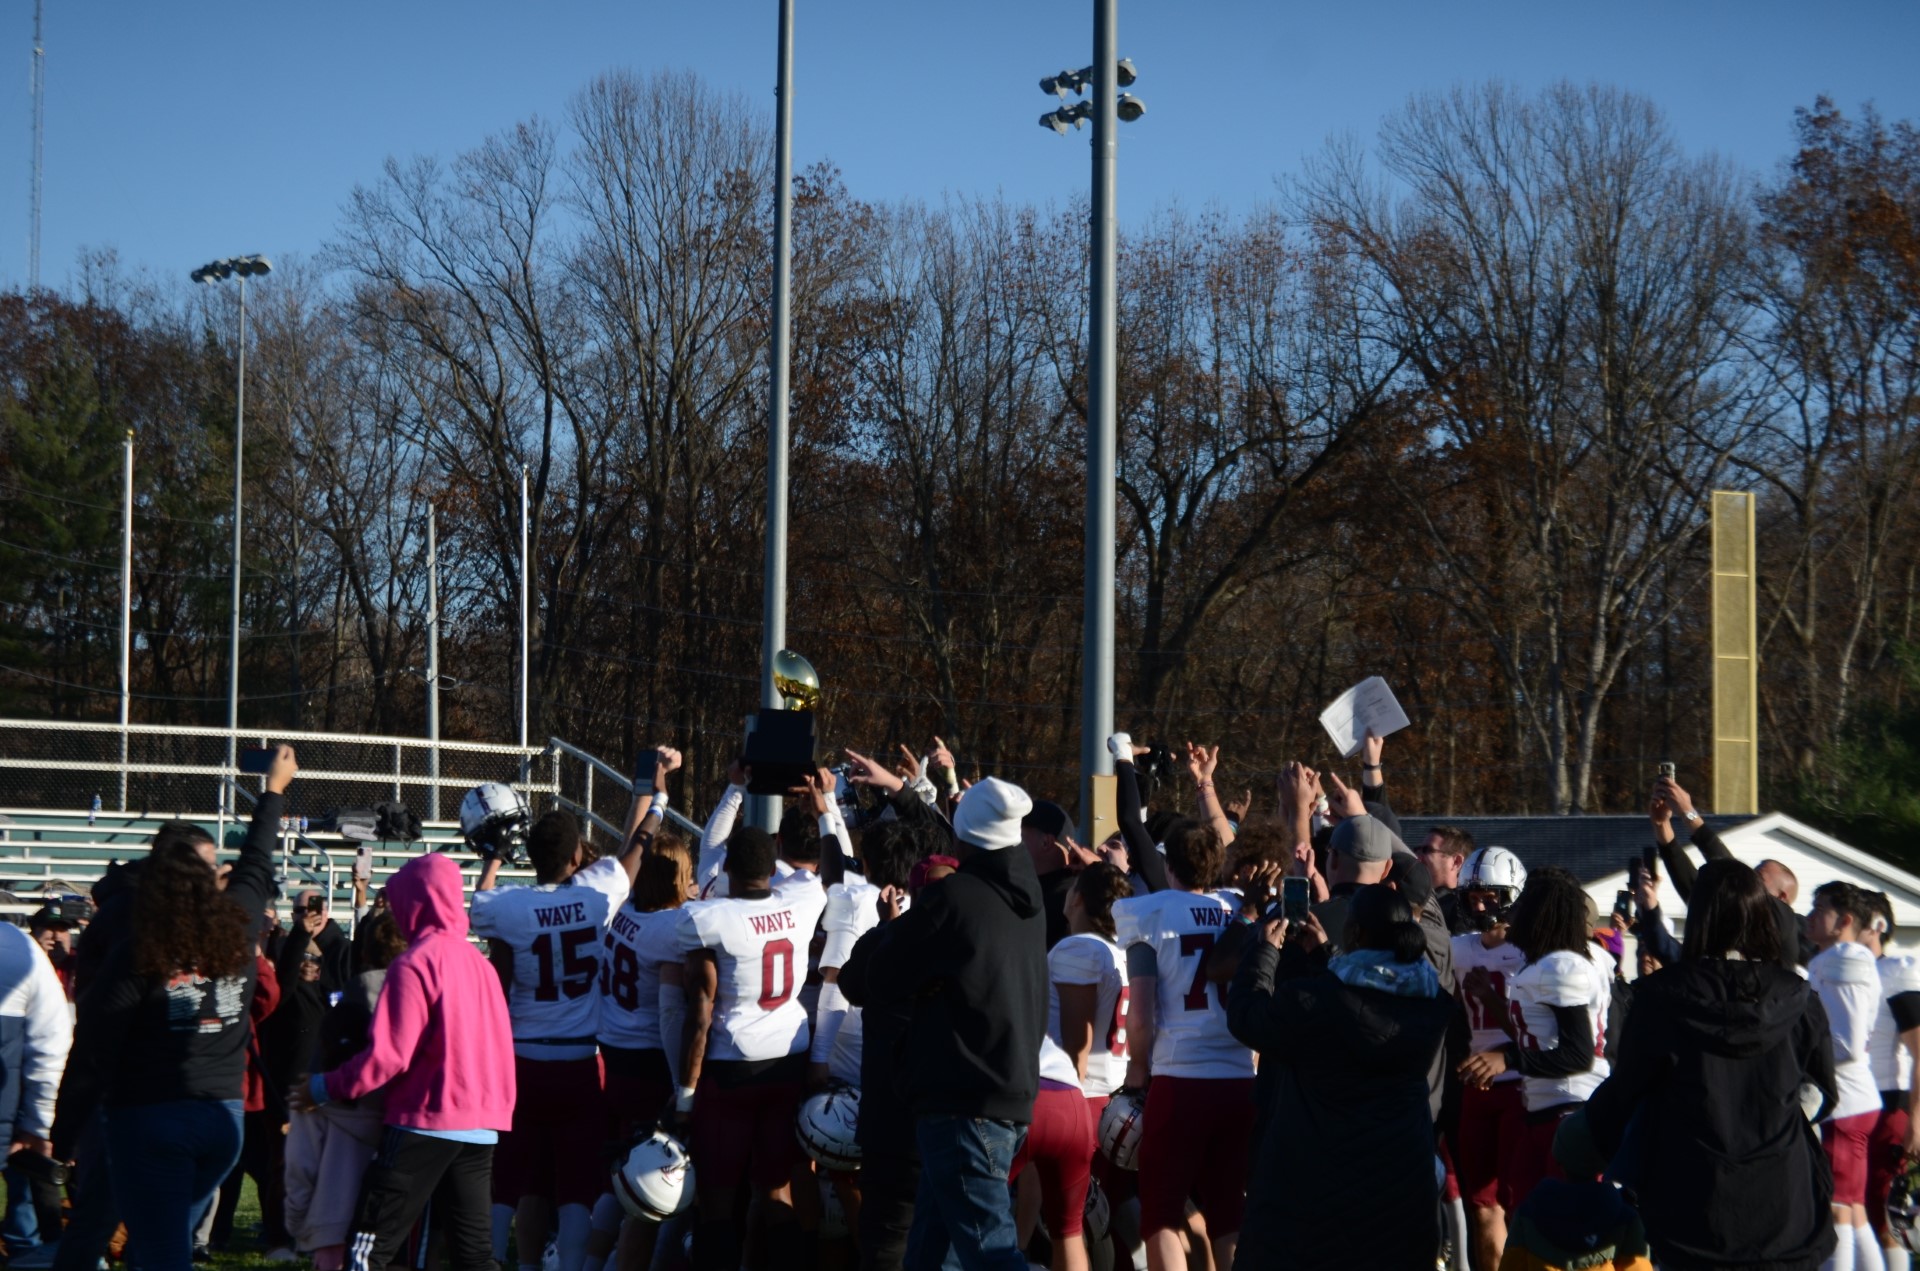 CCSJ celebrates after winning the MSFL championship game over St. Mary-of-the-Woods in Terre Haute, IN.